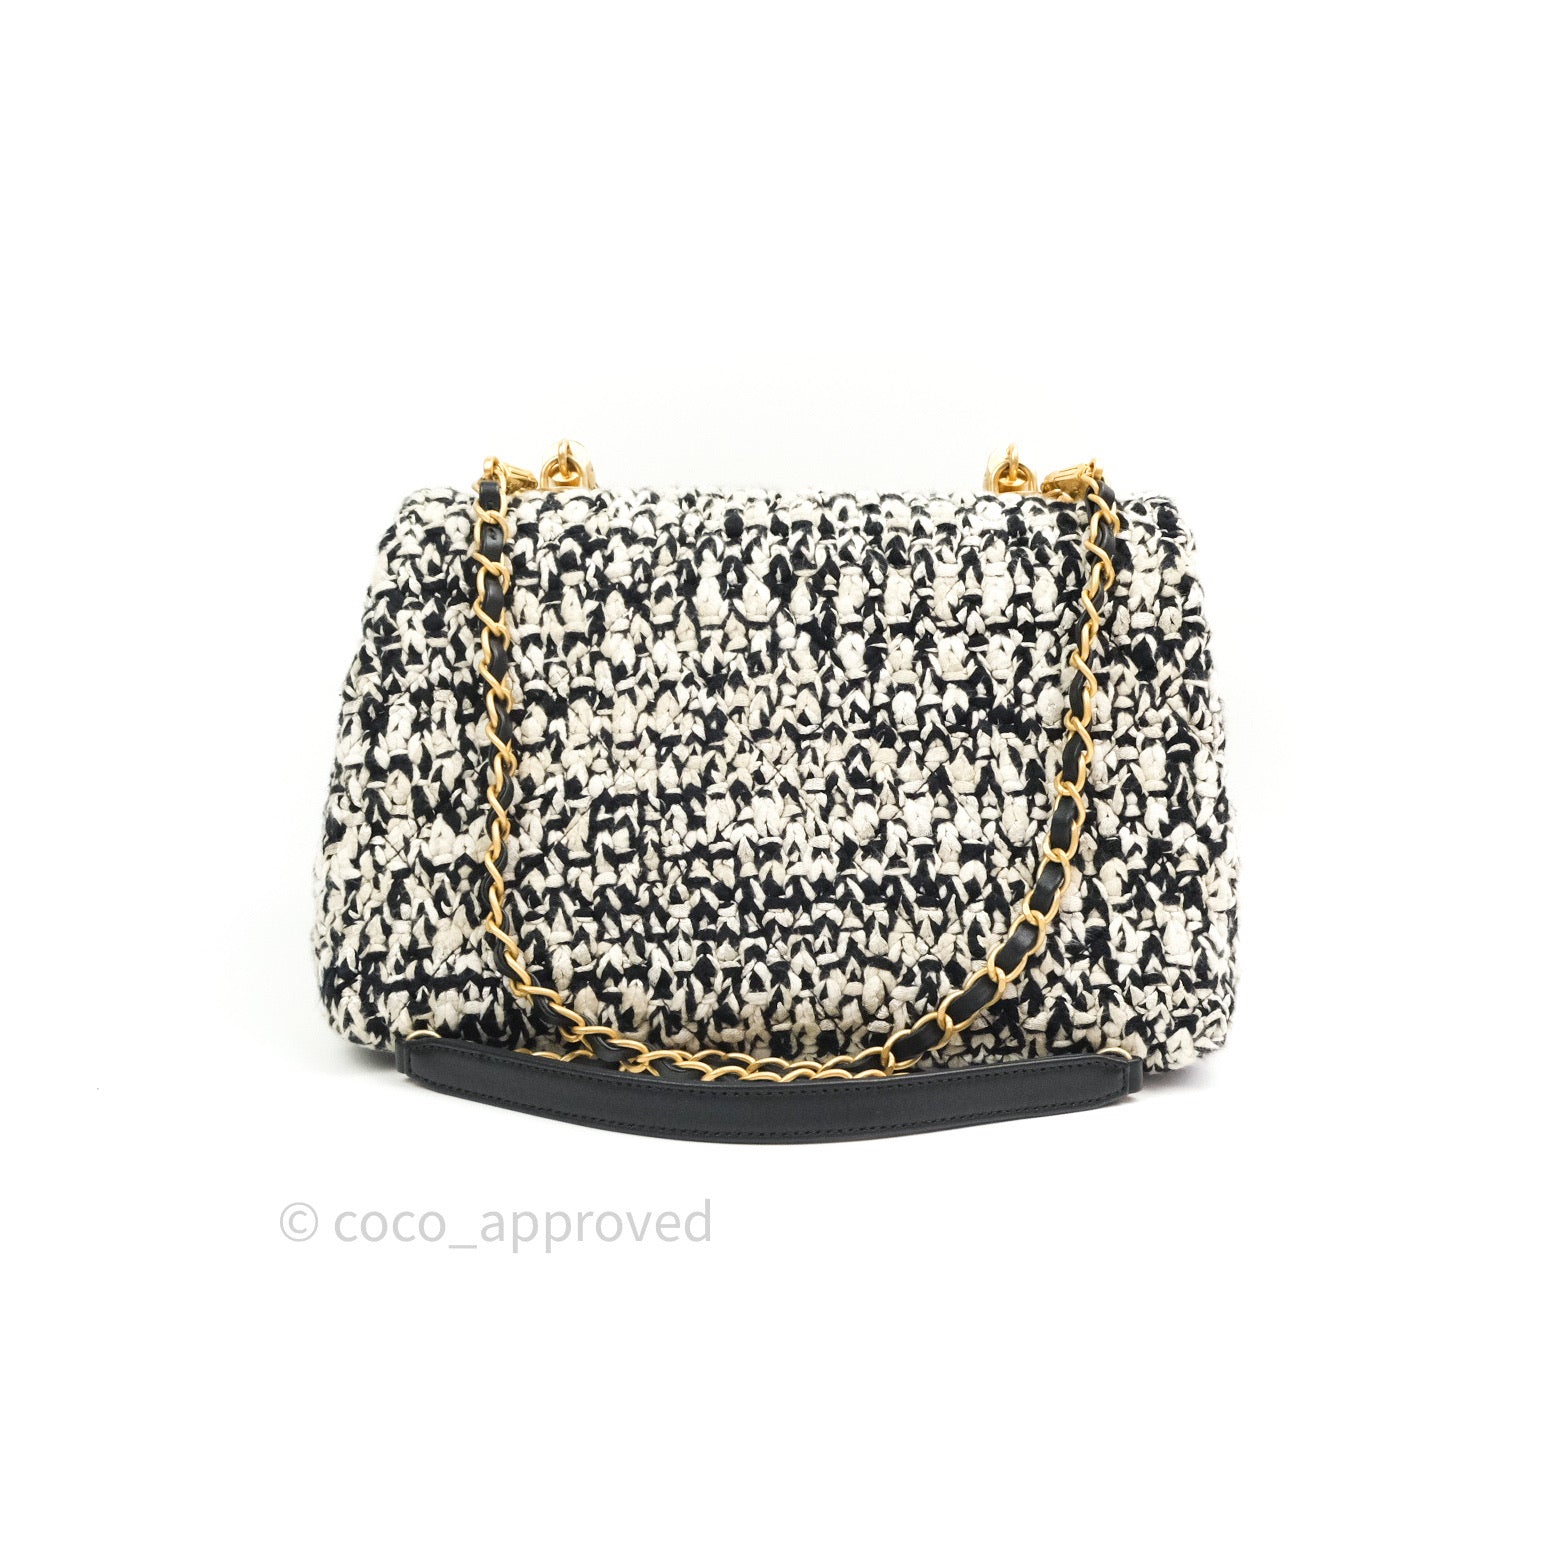 Chanel Flap Bag Tweed Black White Crochet Top Handle – Coco Approved Studio